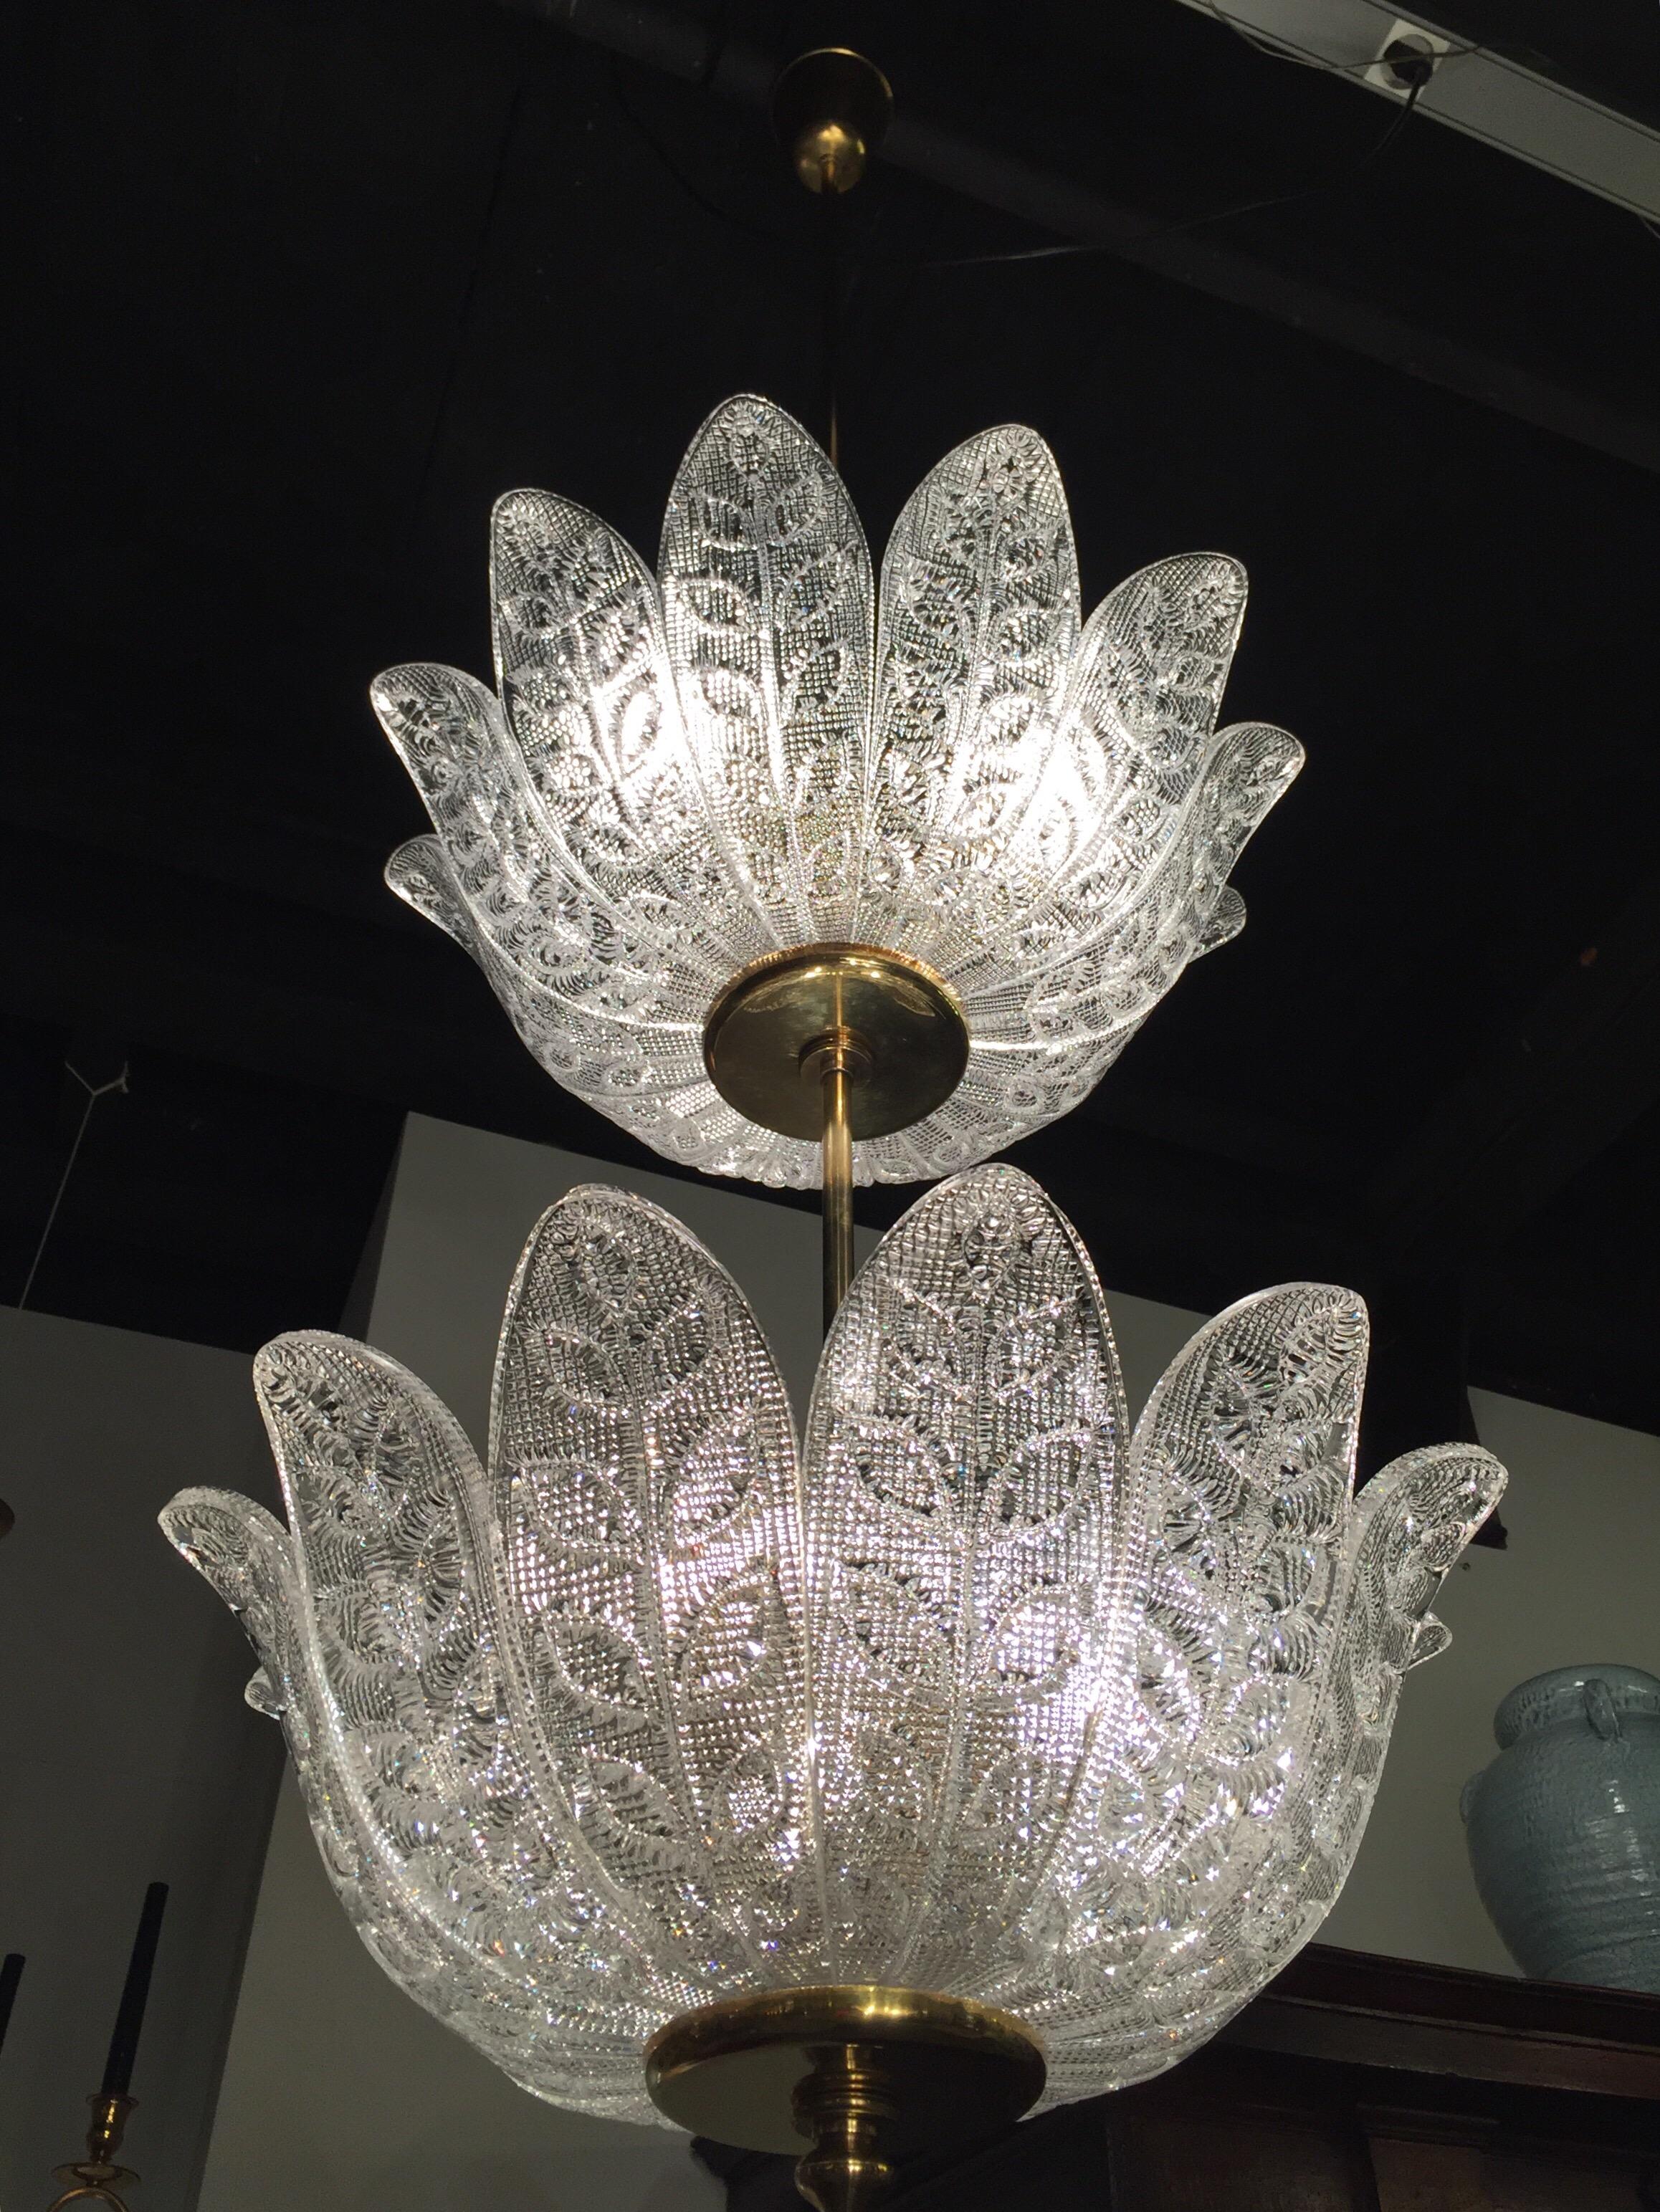 20th Century Scandinavian Pair of Chandeliers Crystal and Brass Flower Decor, circa 1940-1950 For Sale